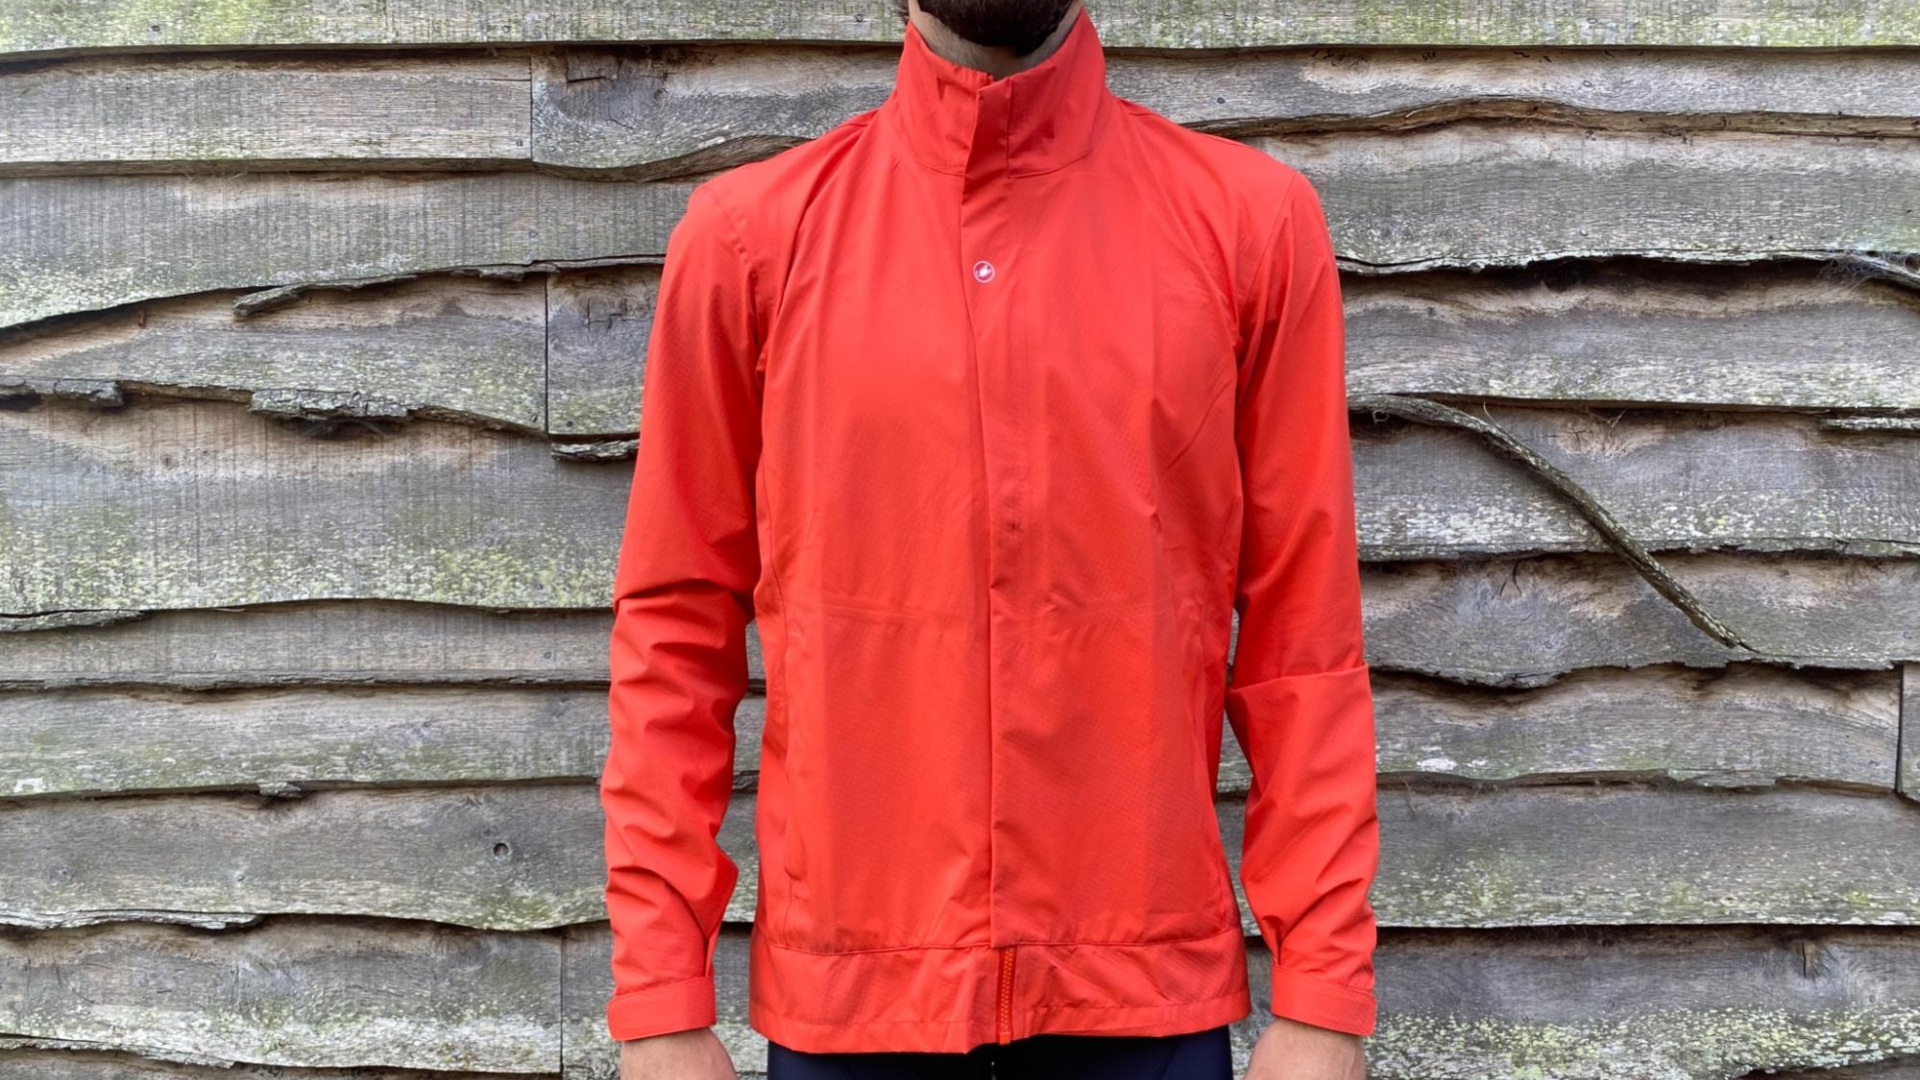 Castelli Commuter Reflex Jacket review – I couldn't believe just